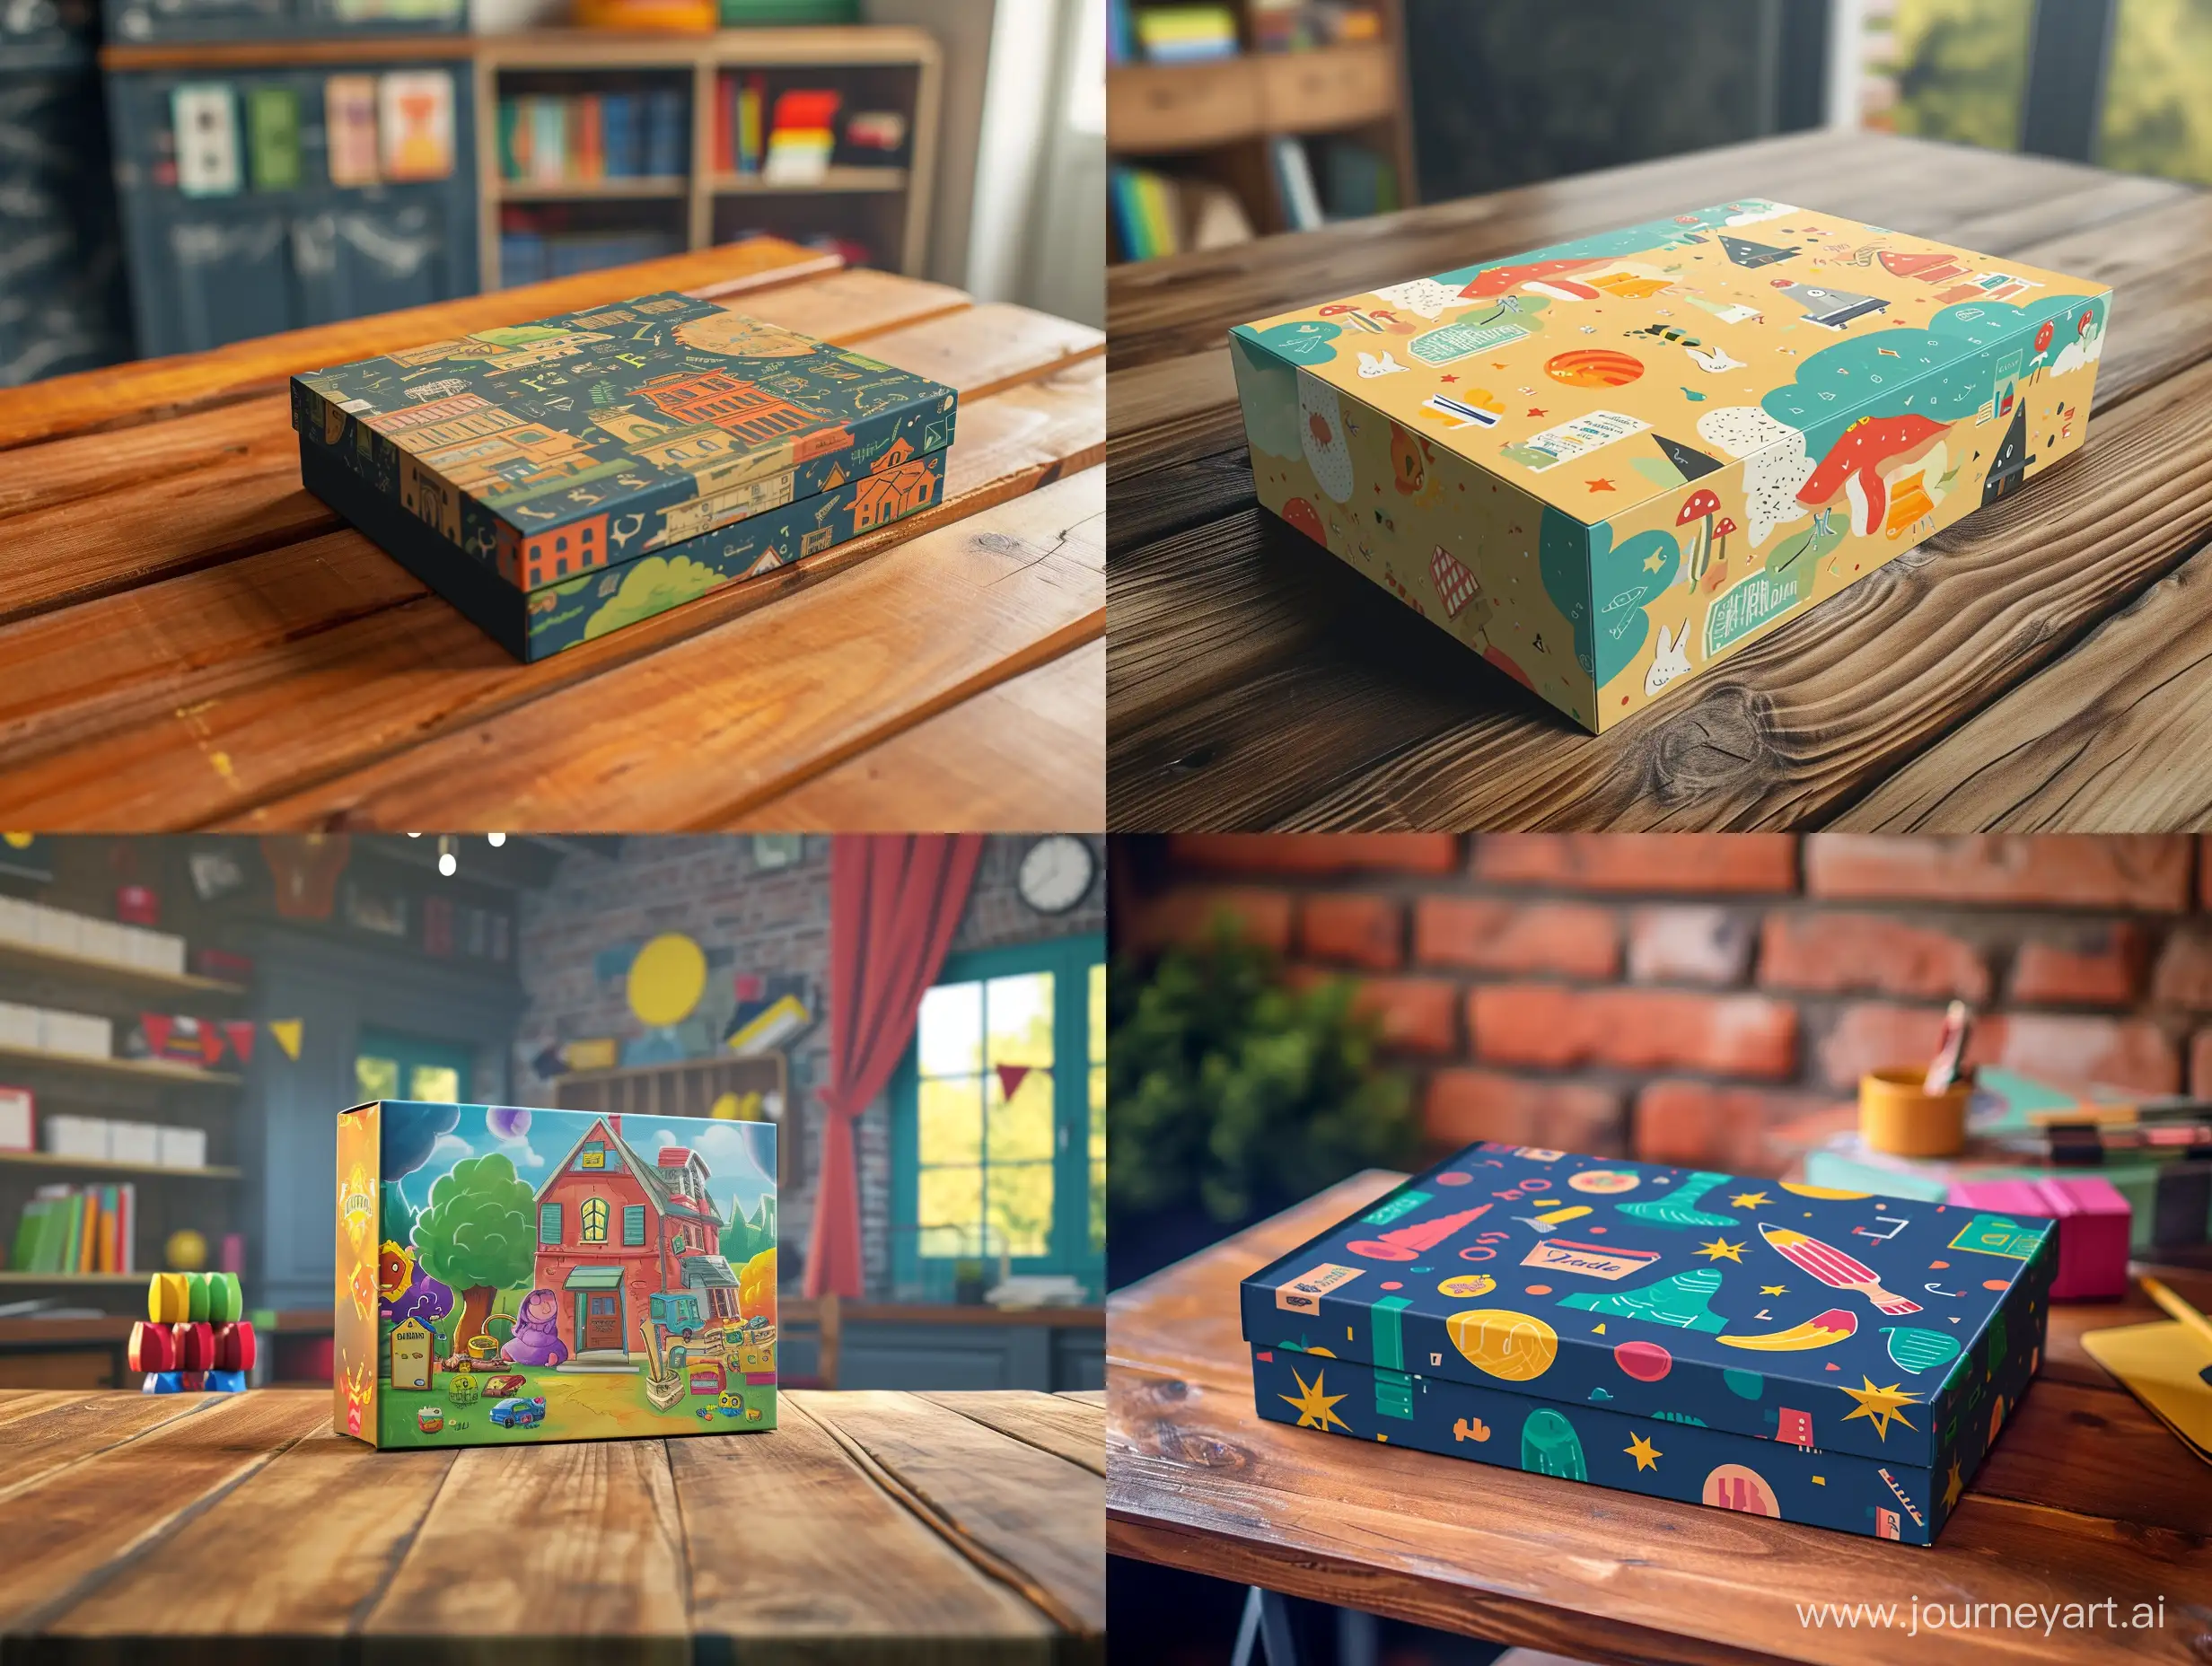 A mockup design of board game box, school items background, wood table